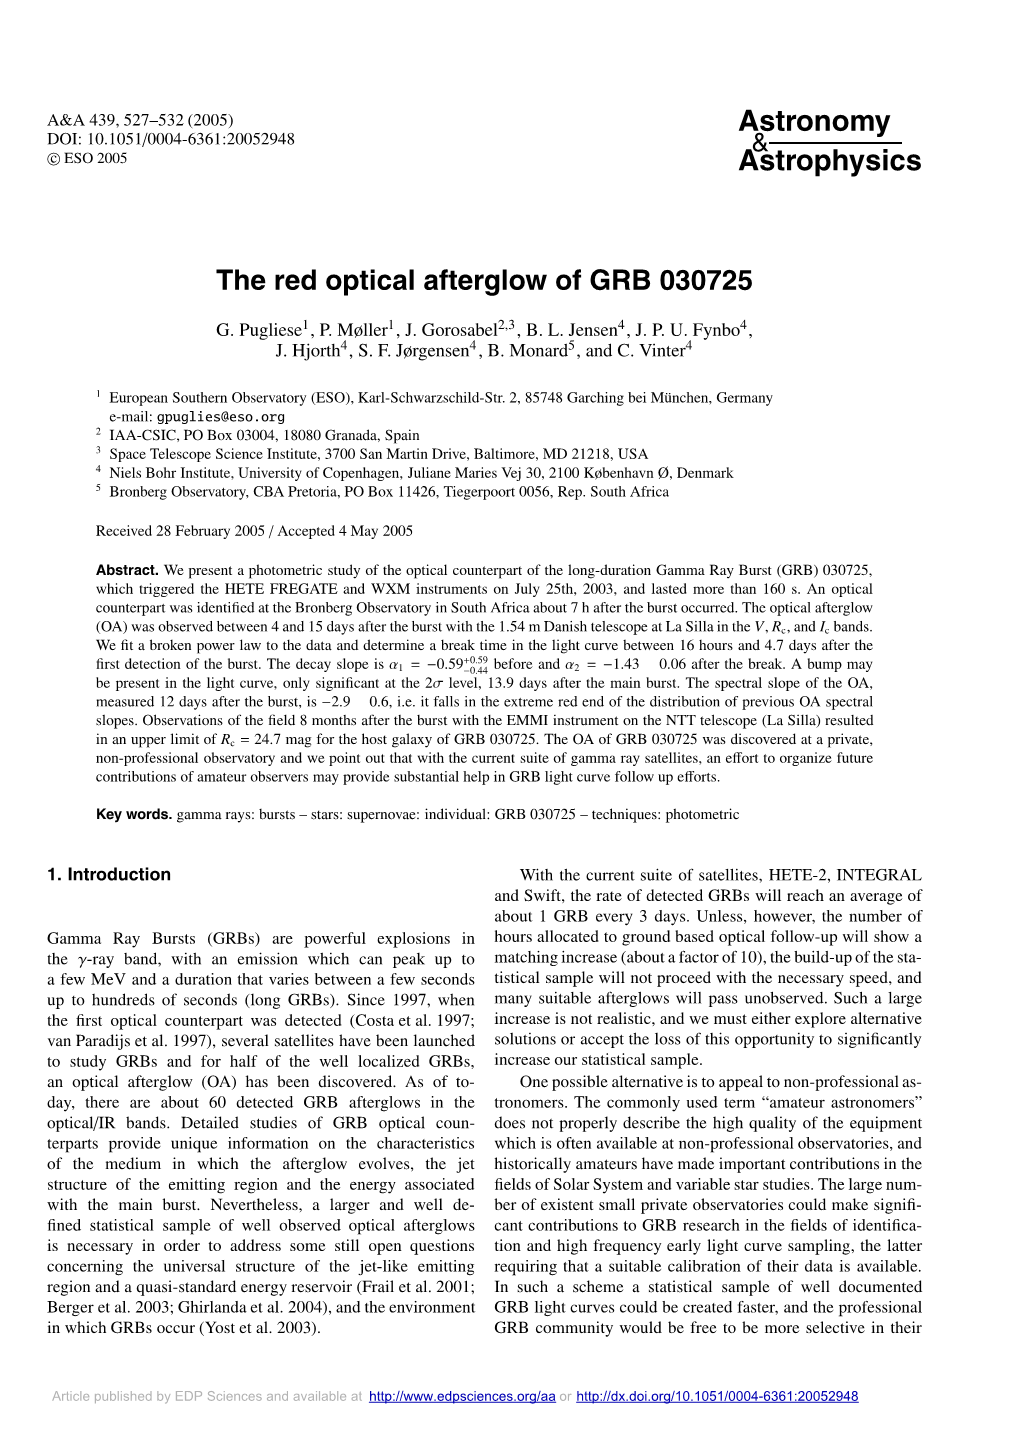 The Red Optical Afterglow of GRB 030725